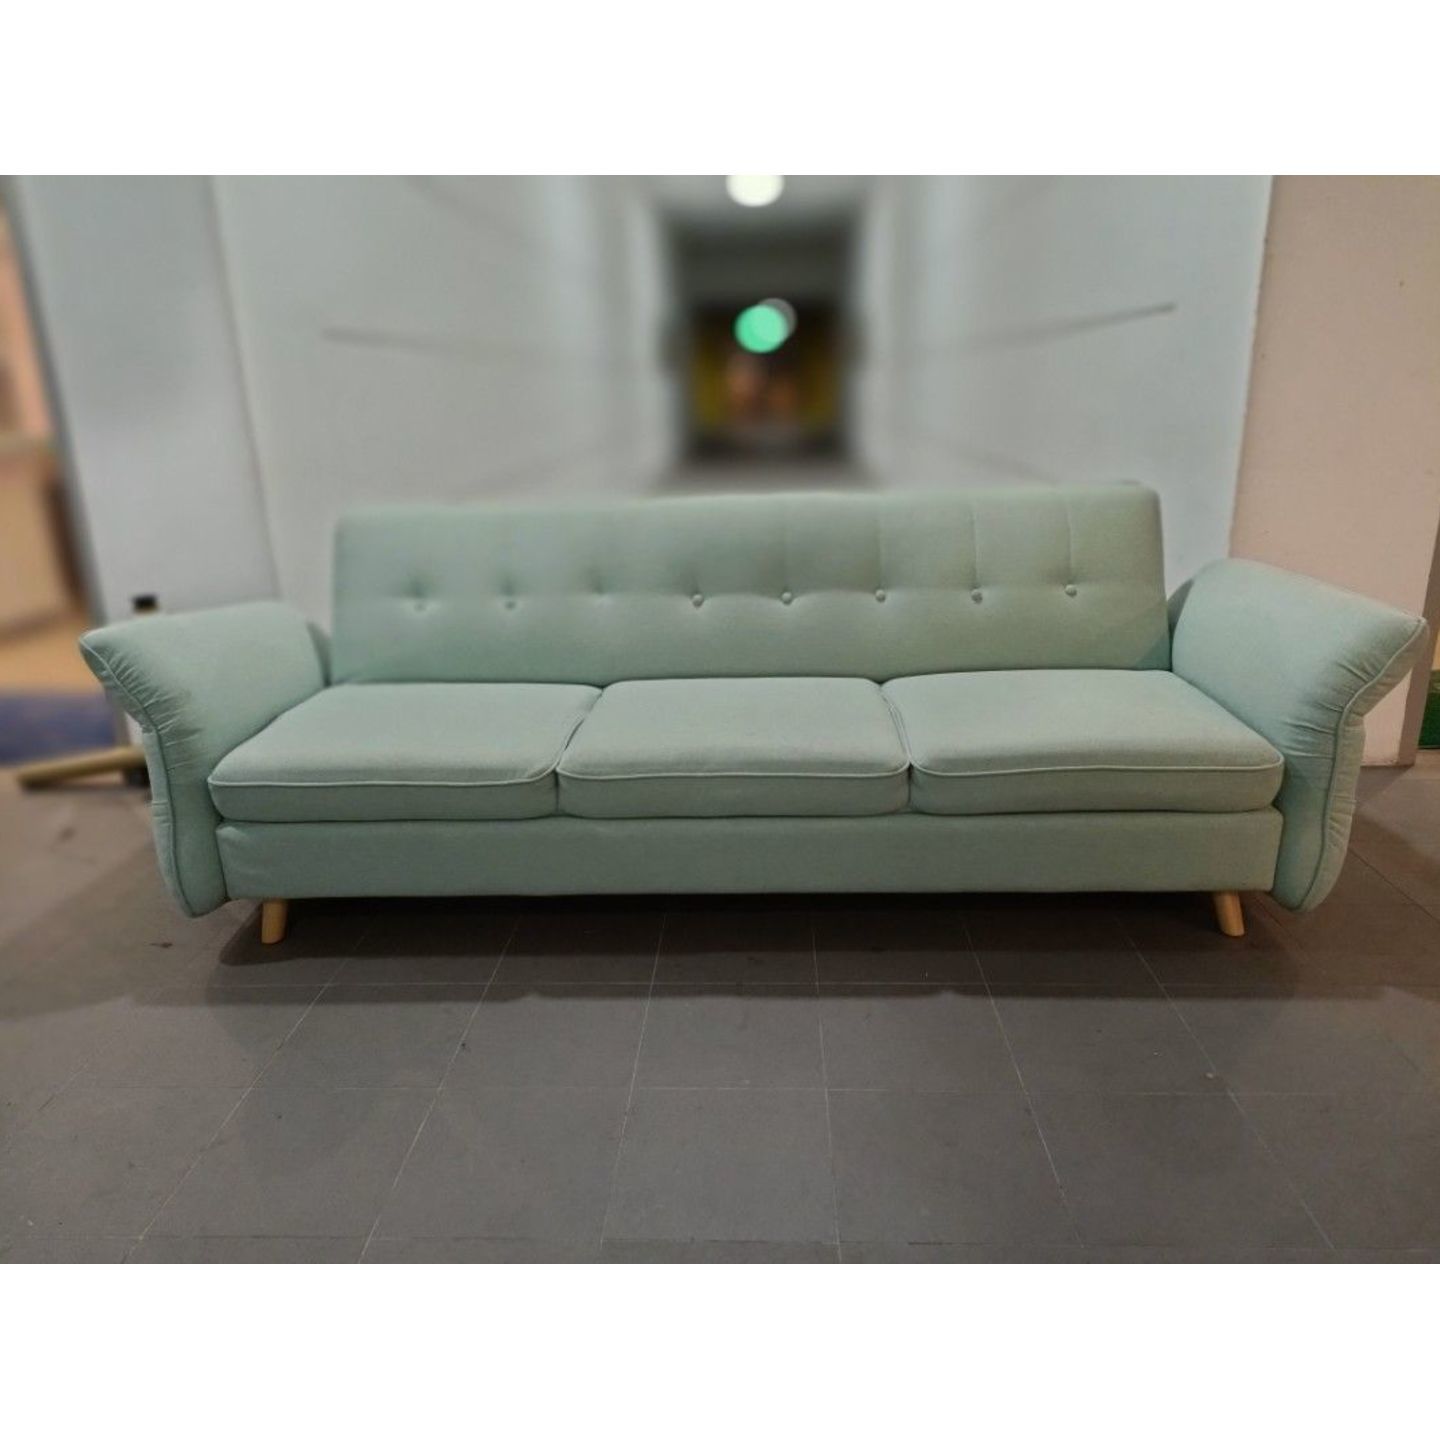 GAGE 3 Seater Sofa Bed in TEAL GREEN FABRIC